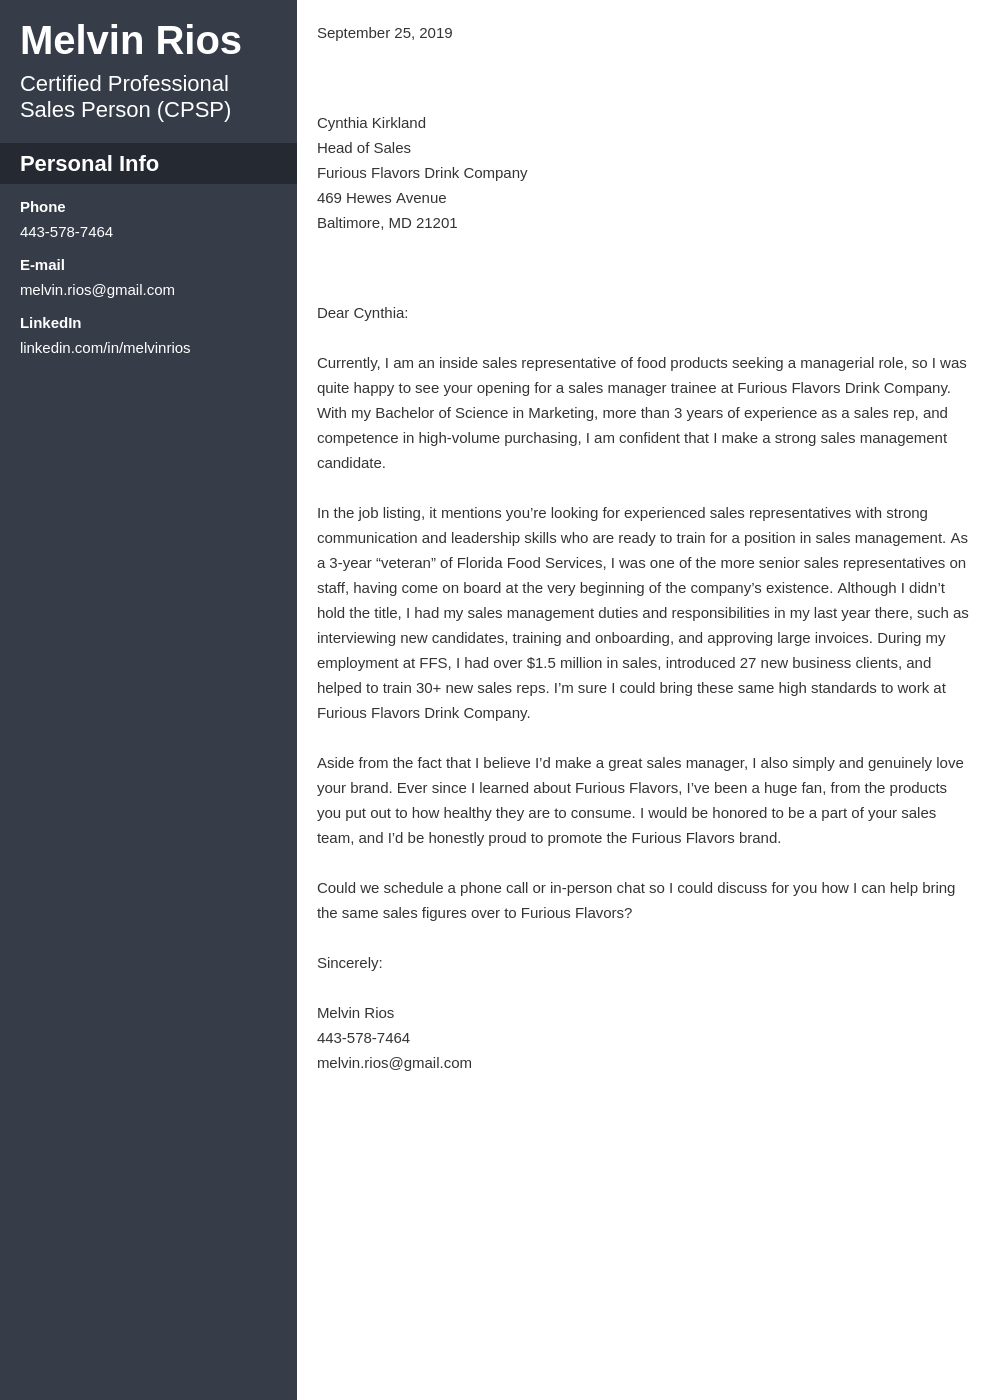 mckinsey cover letter examples